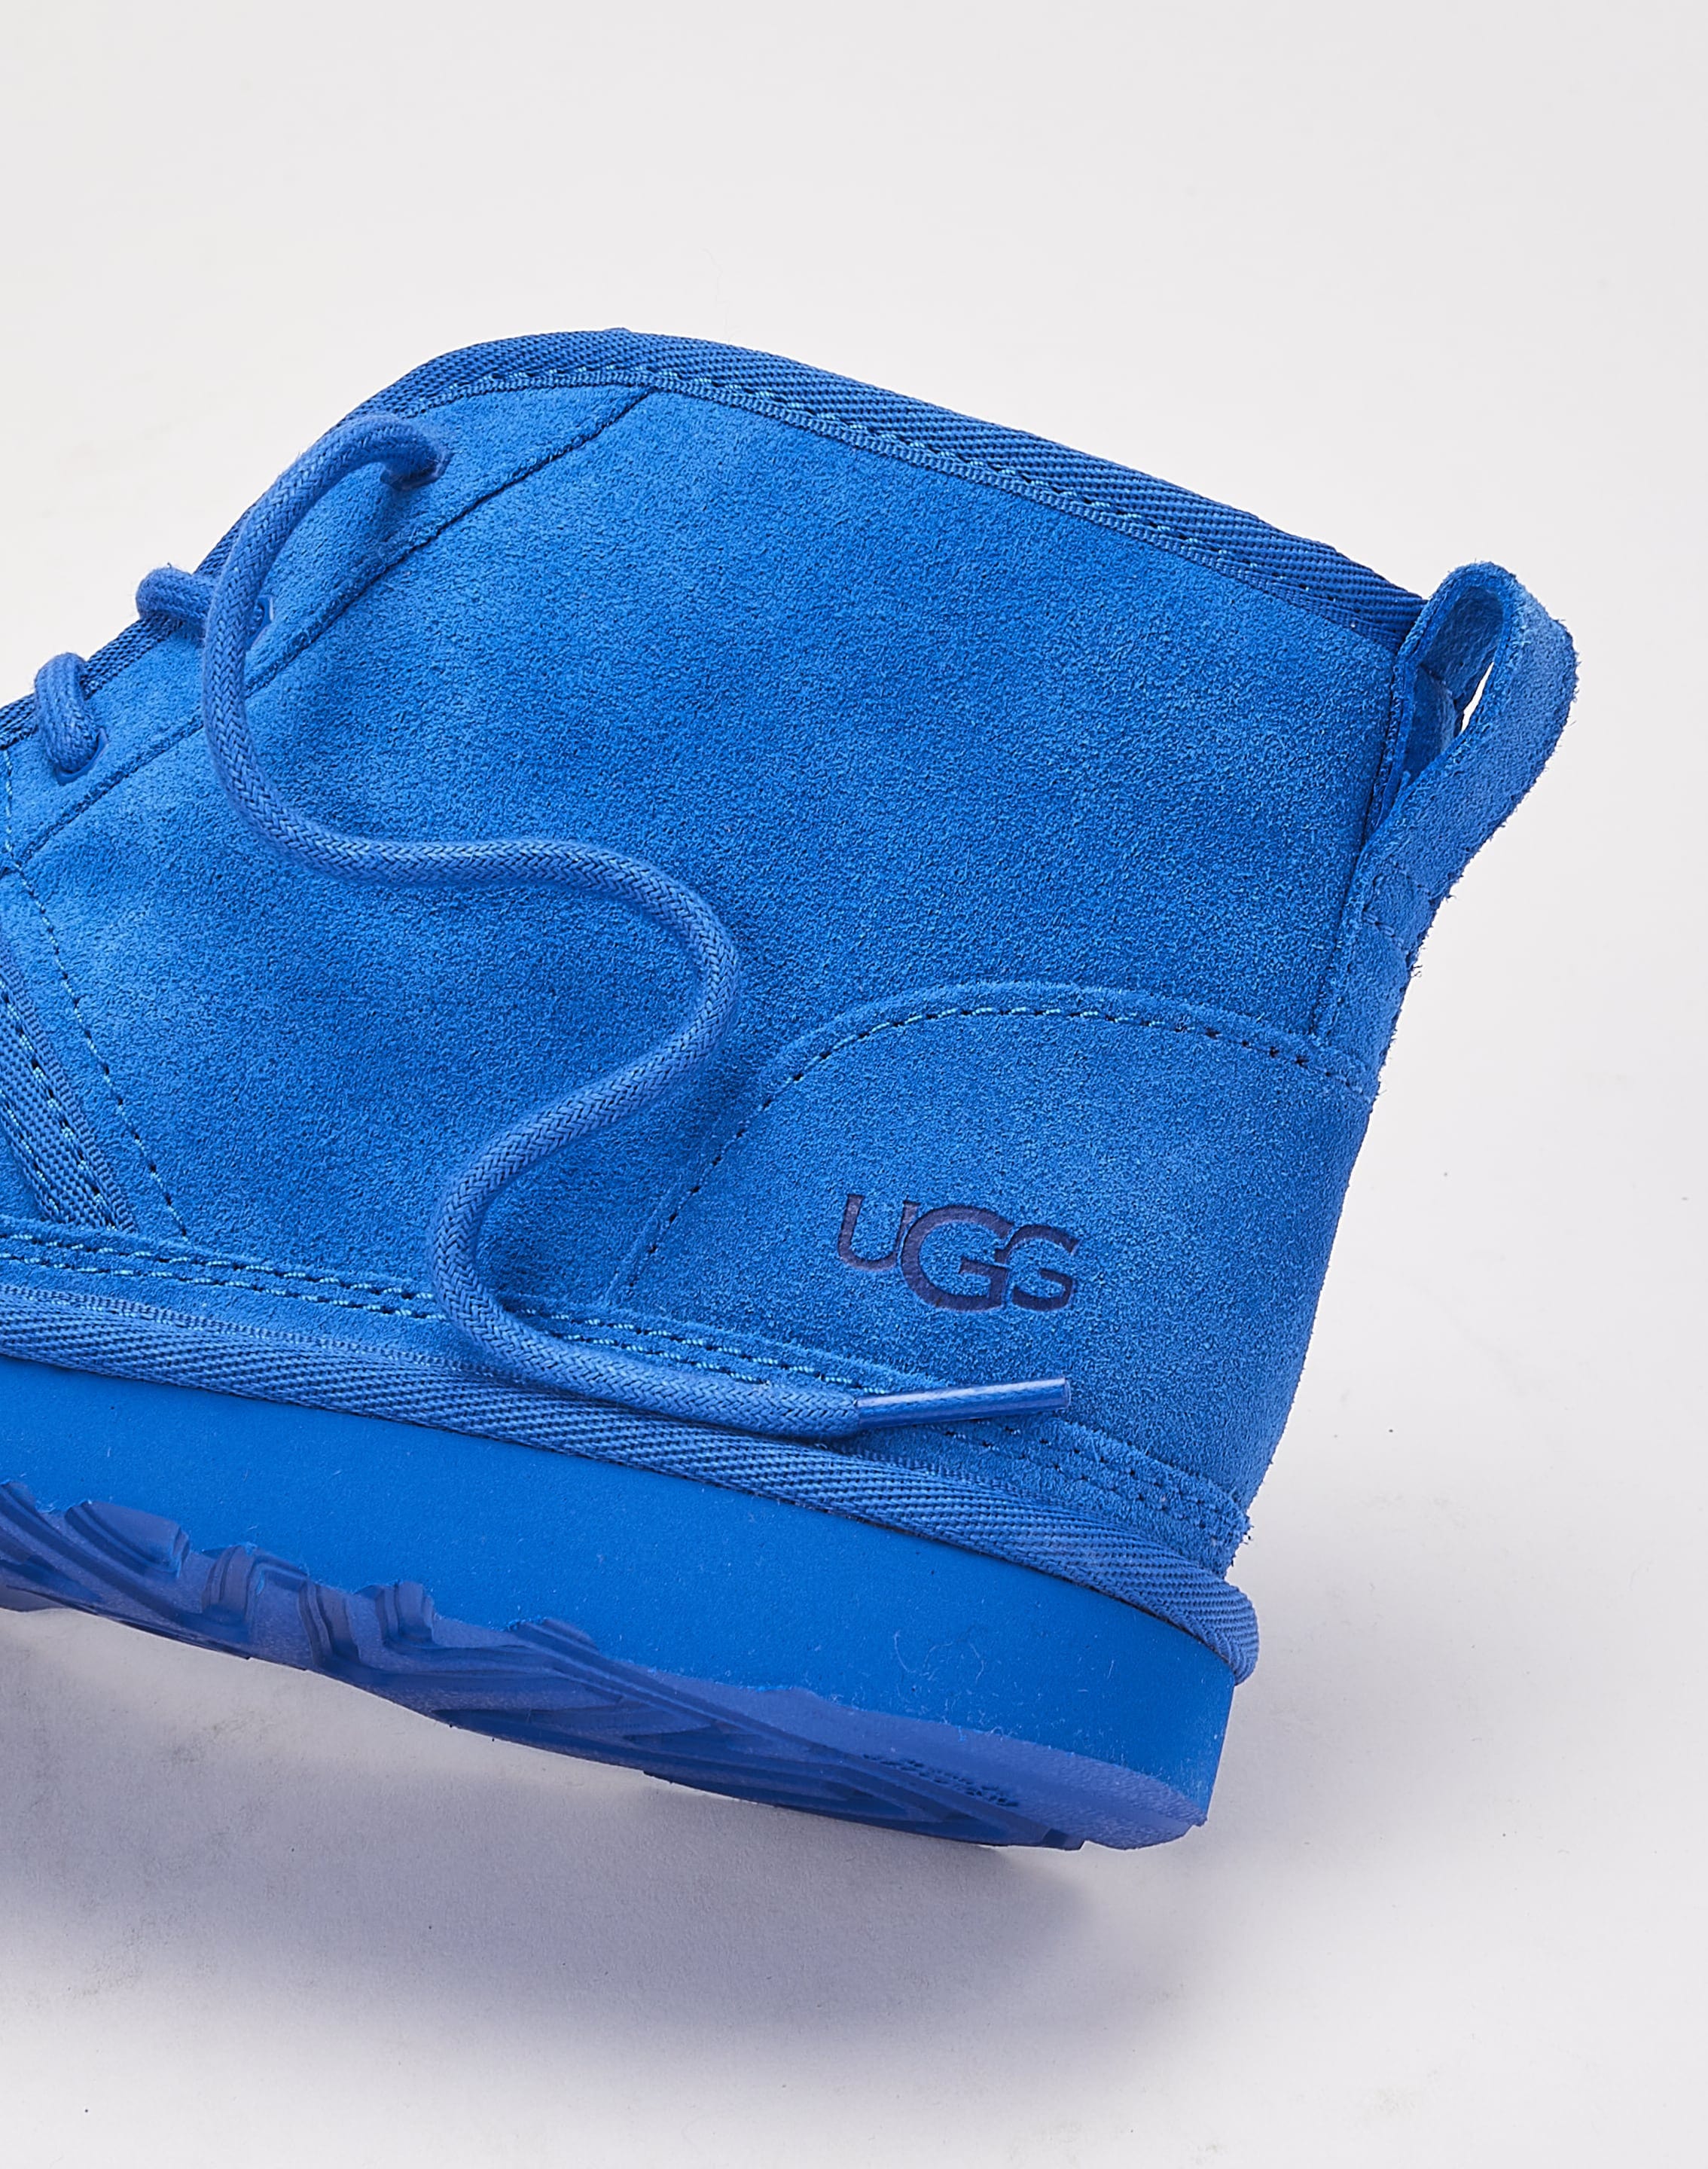 Ugg Neumel II Girls' Toddler-Youth Boot - Regal Blue Size 6 Youth